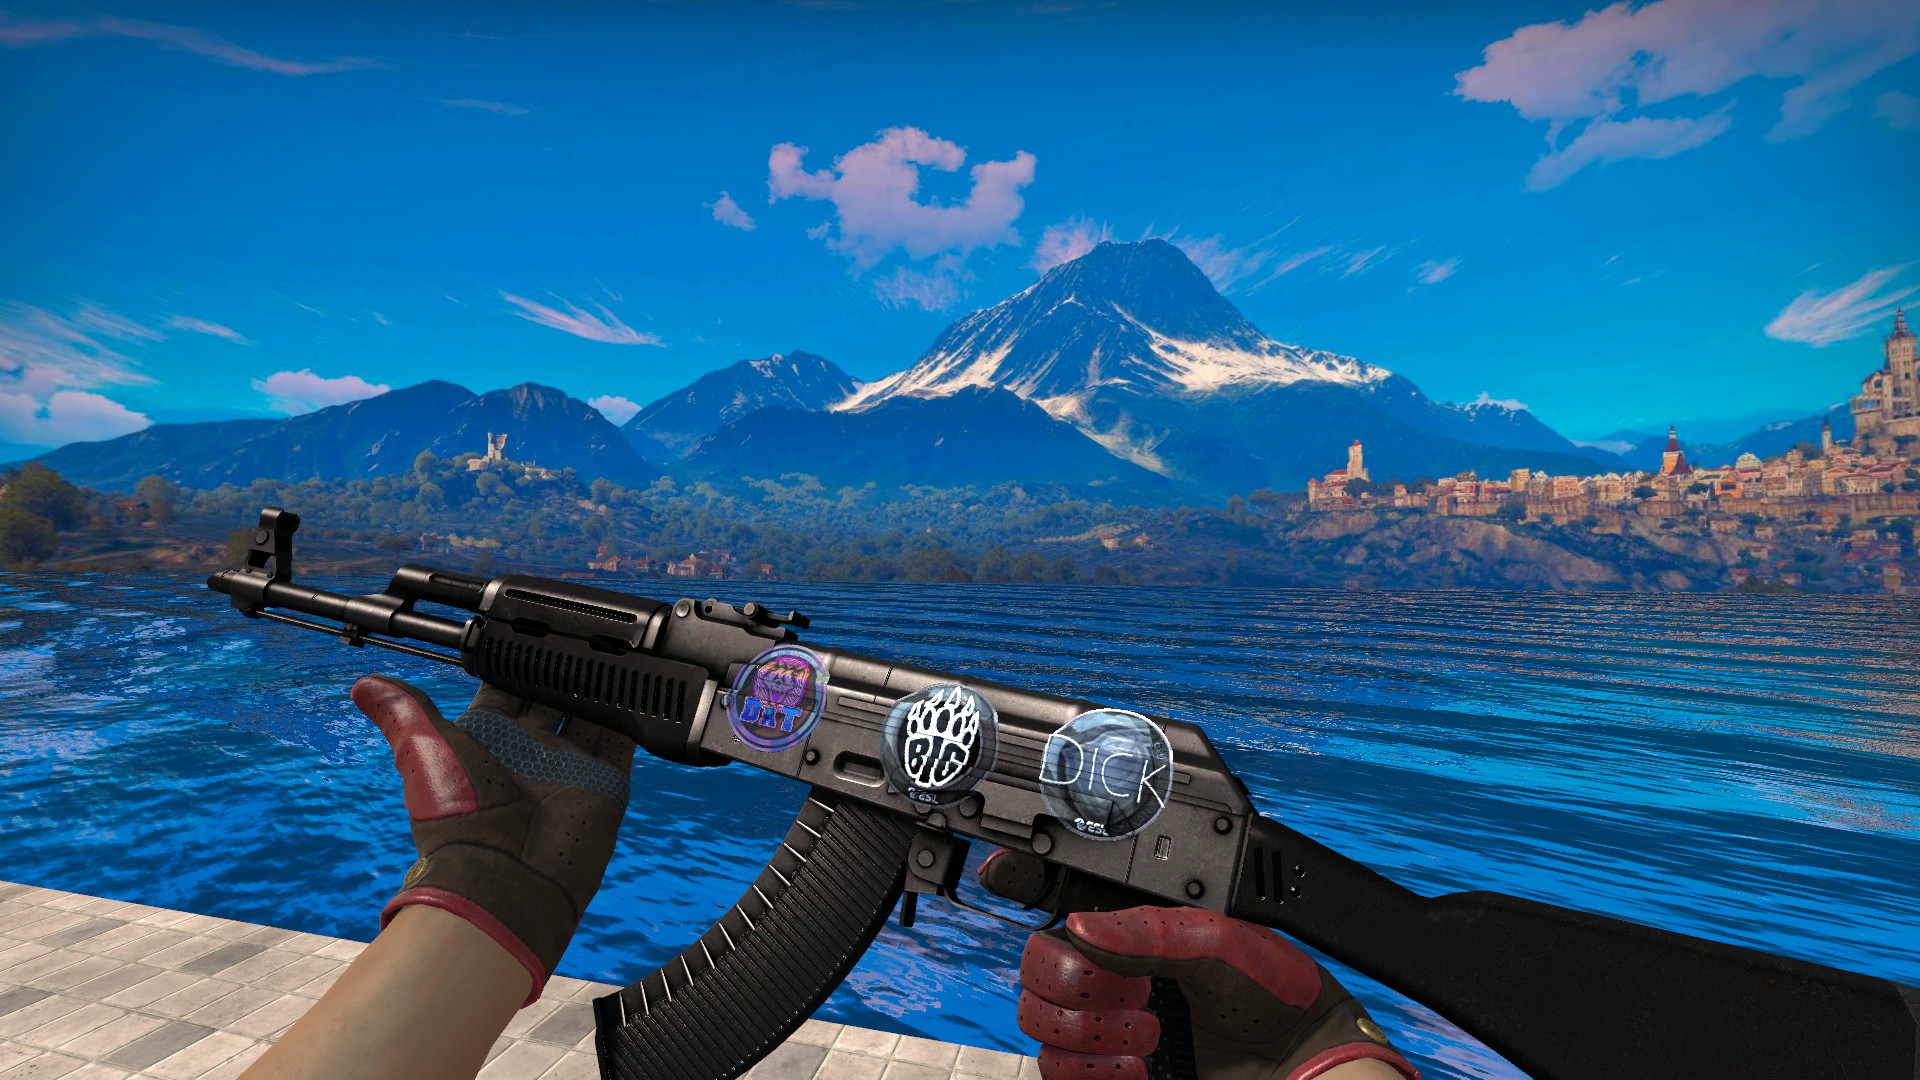 Comunidad de Steam :: Guía :: How To Find Skins With Katowice 2014